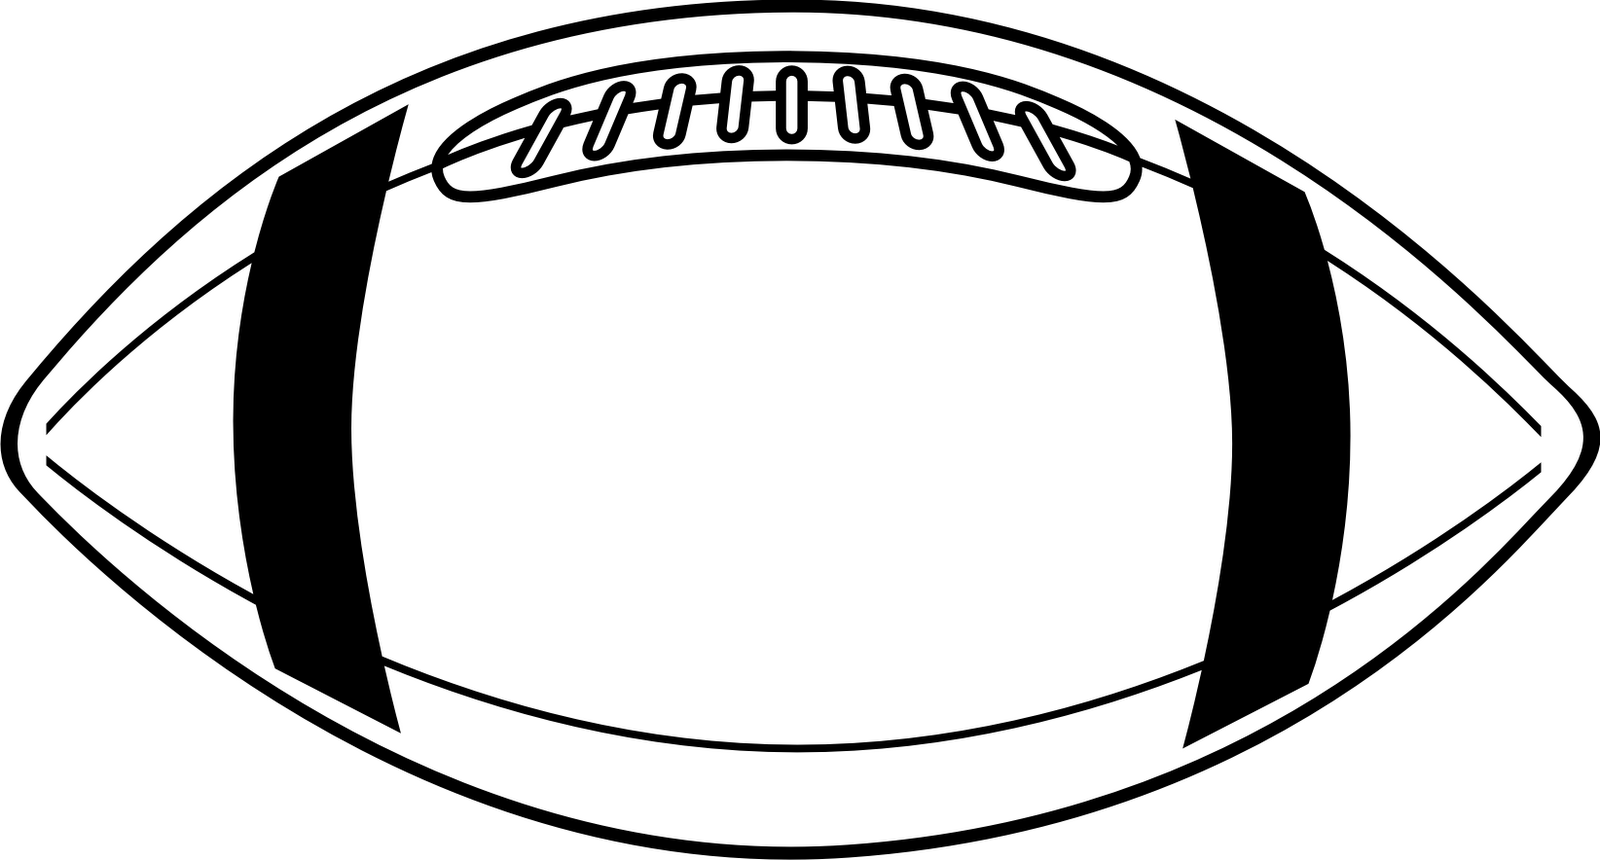 Pics Of Football - Clipart library